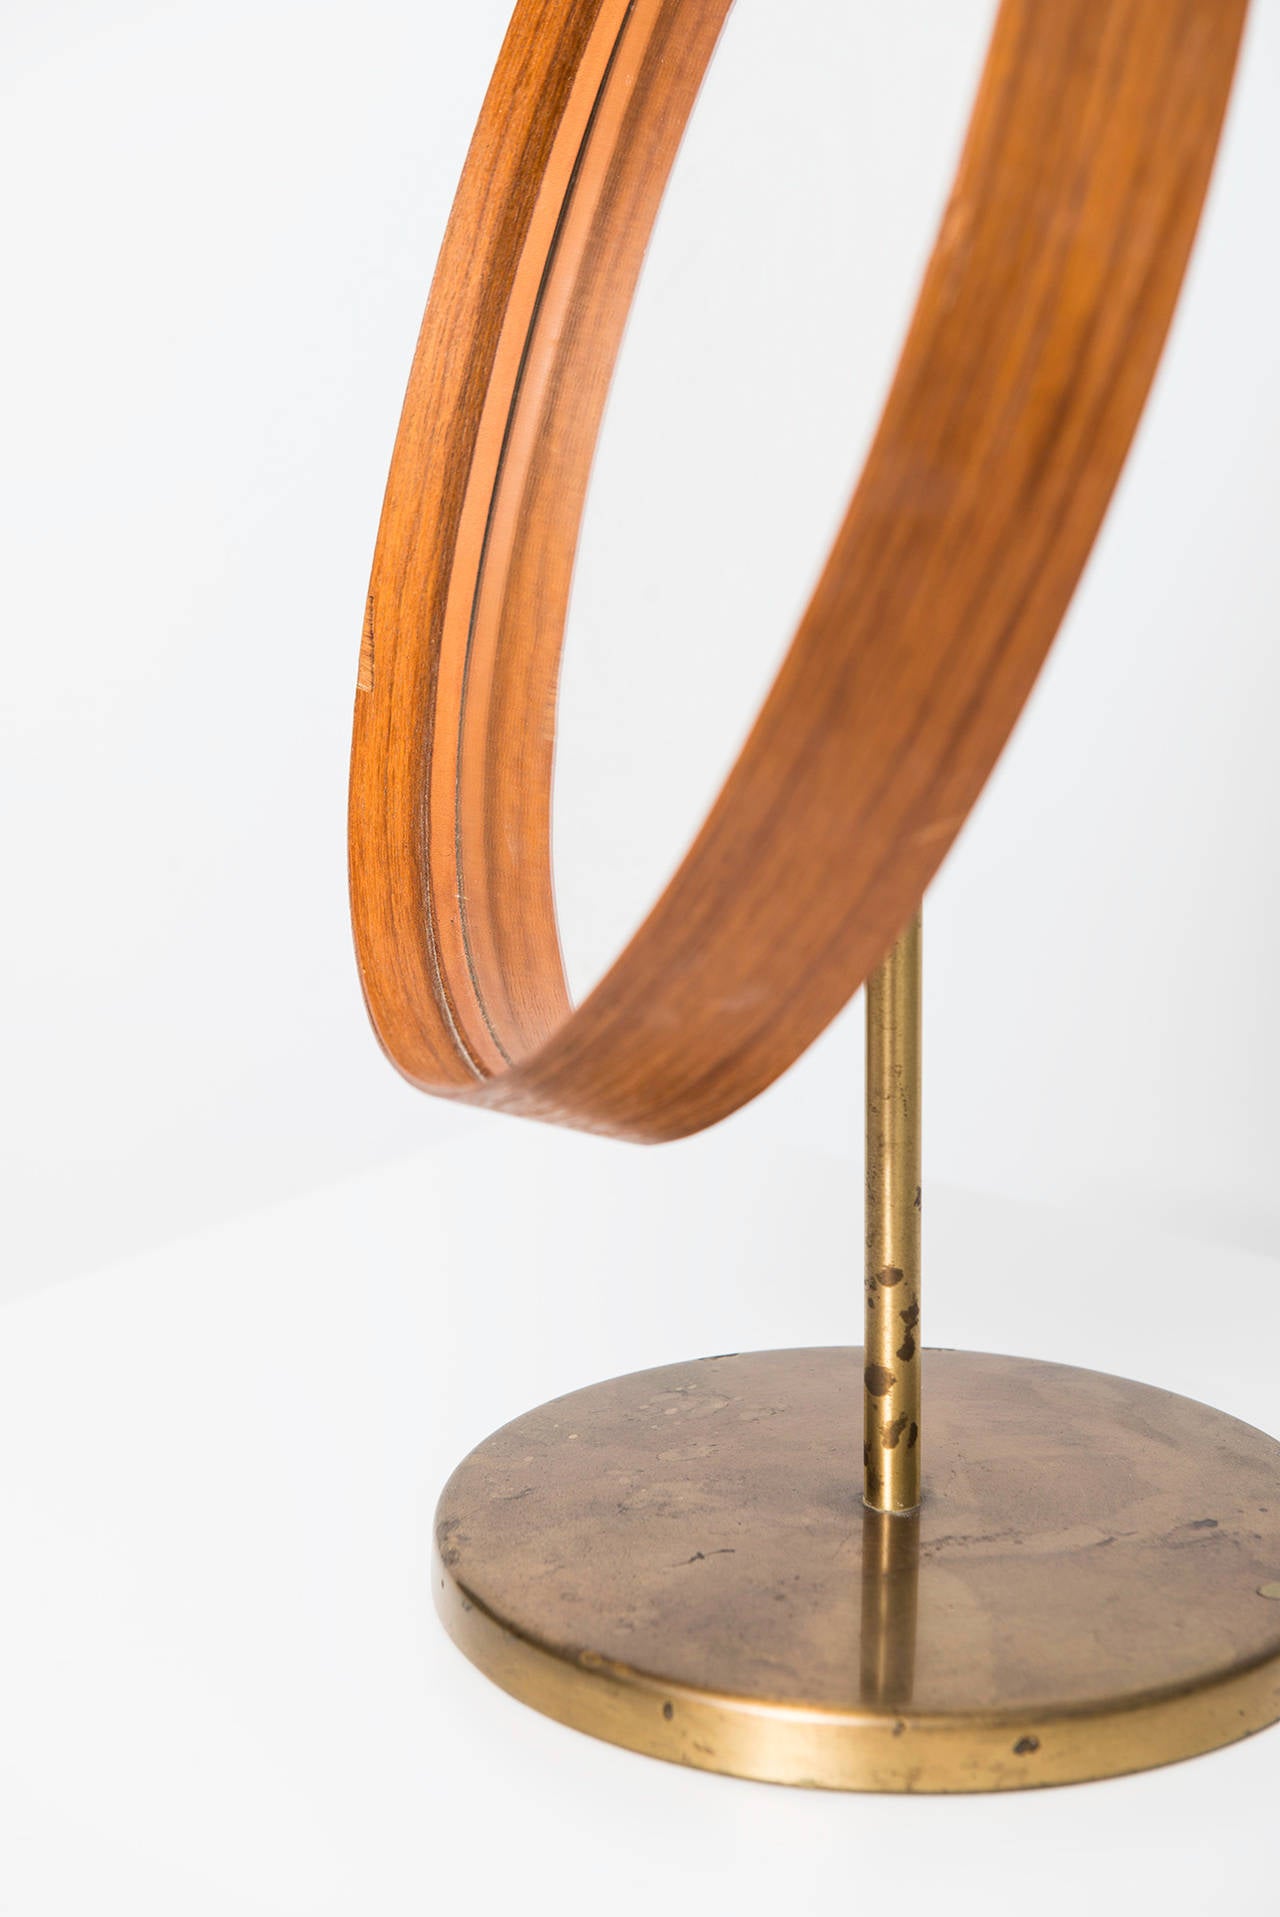 Mid-20th Century Table Mirror in Teak and Brass by Glasmäster in Markaryd, Sweden